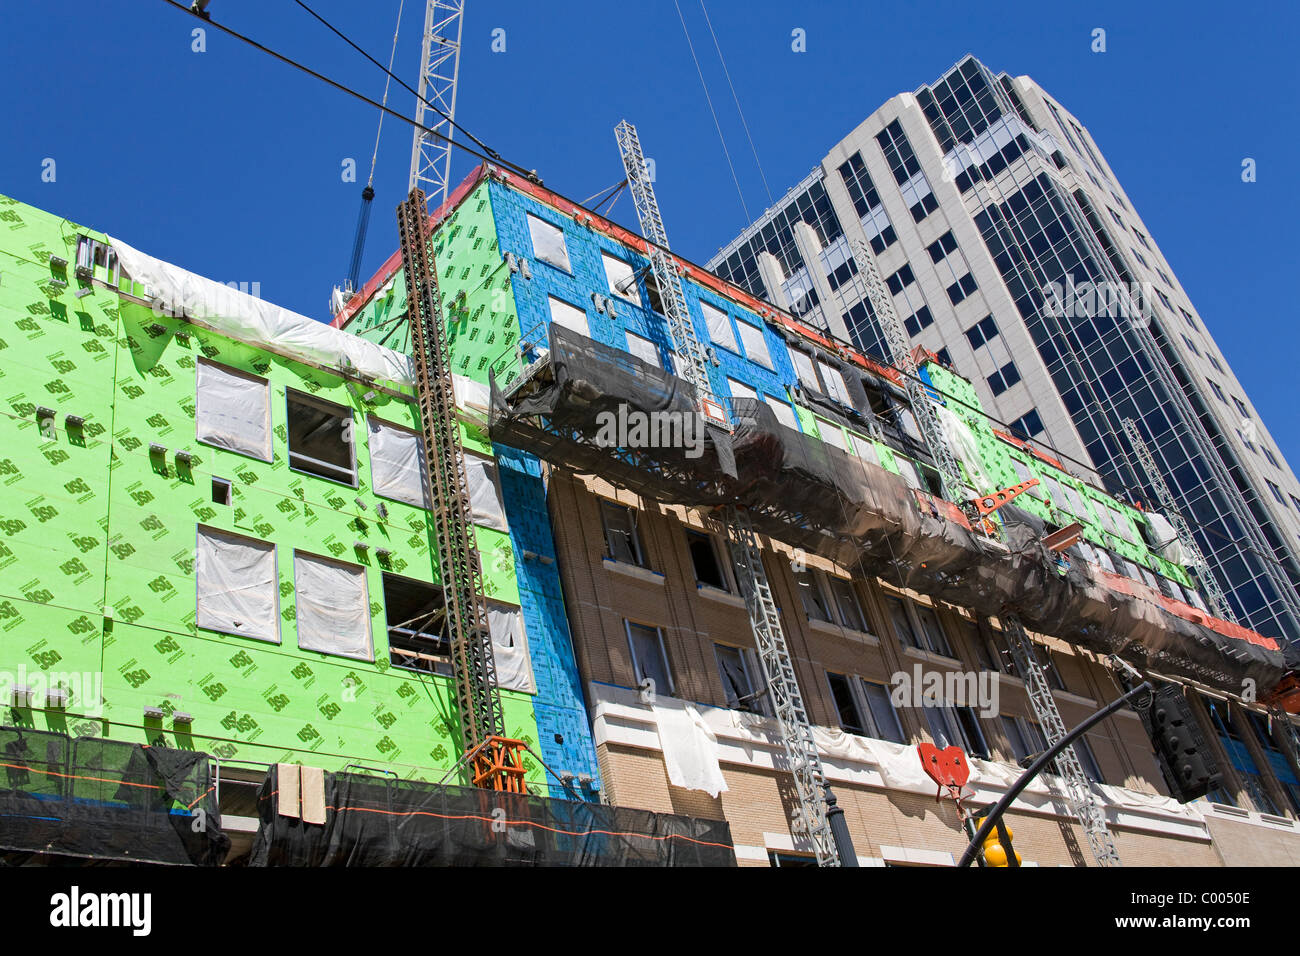 In pictures: Downtown construction update - Building Salt Lake